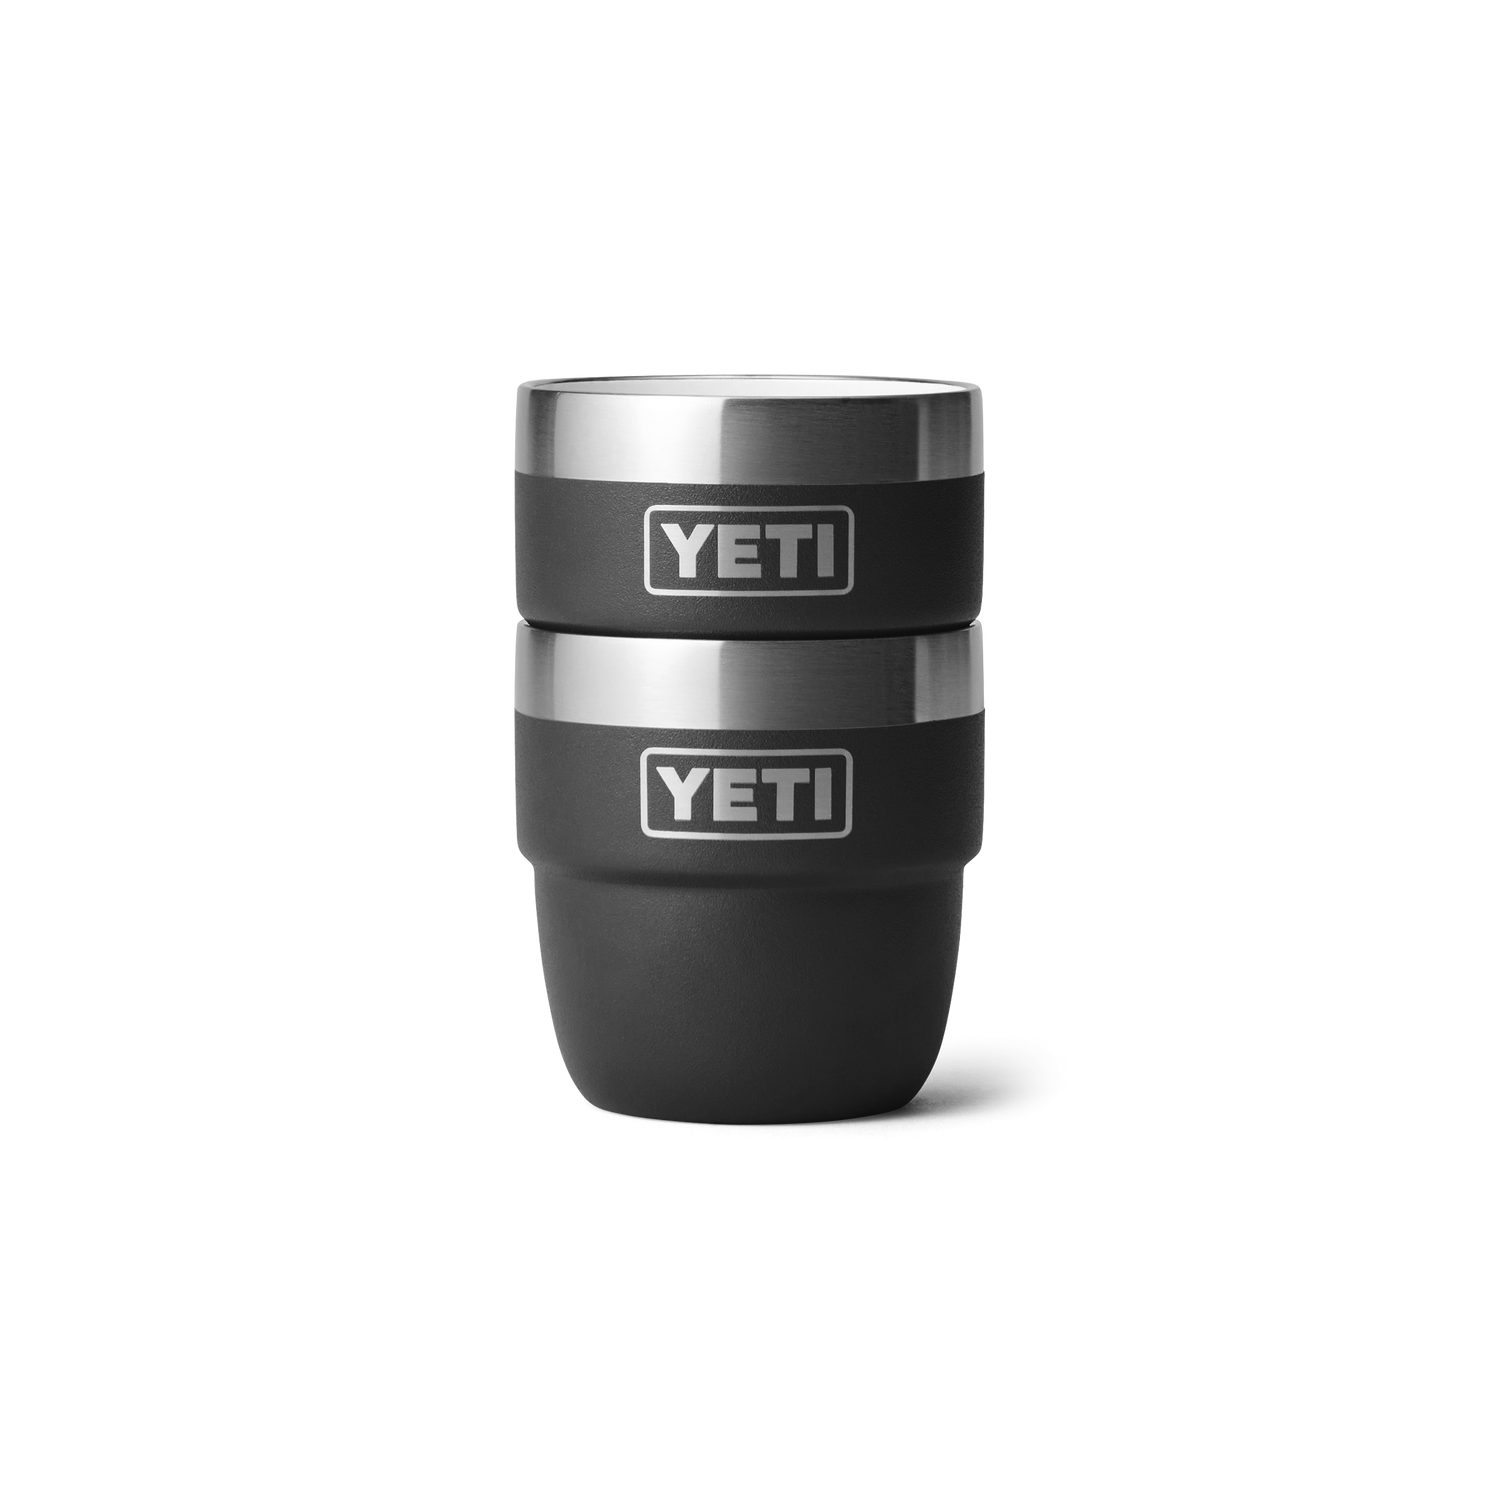 YETI Rambler Stackable Cup - 4 fl. oz. - Package of 2